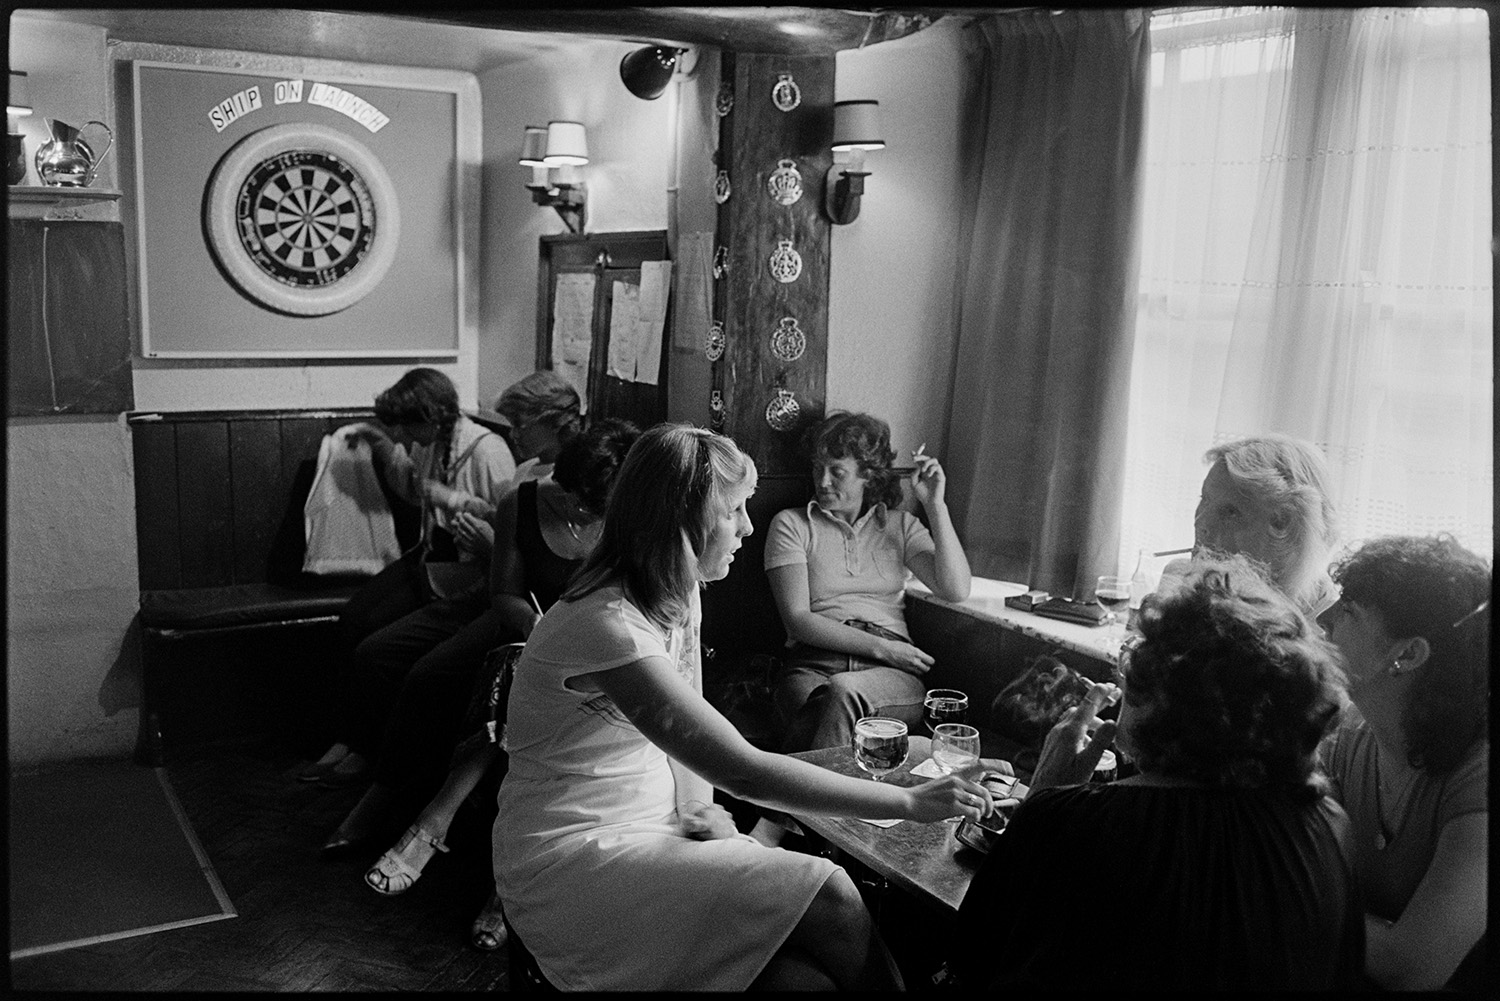 People drinking and playing darts in pub. 
[A group of women drinking and smoking in the Blacksmiths Arms pub at East the Water, Bideford. A dartboard can be seen on the all in the background.]